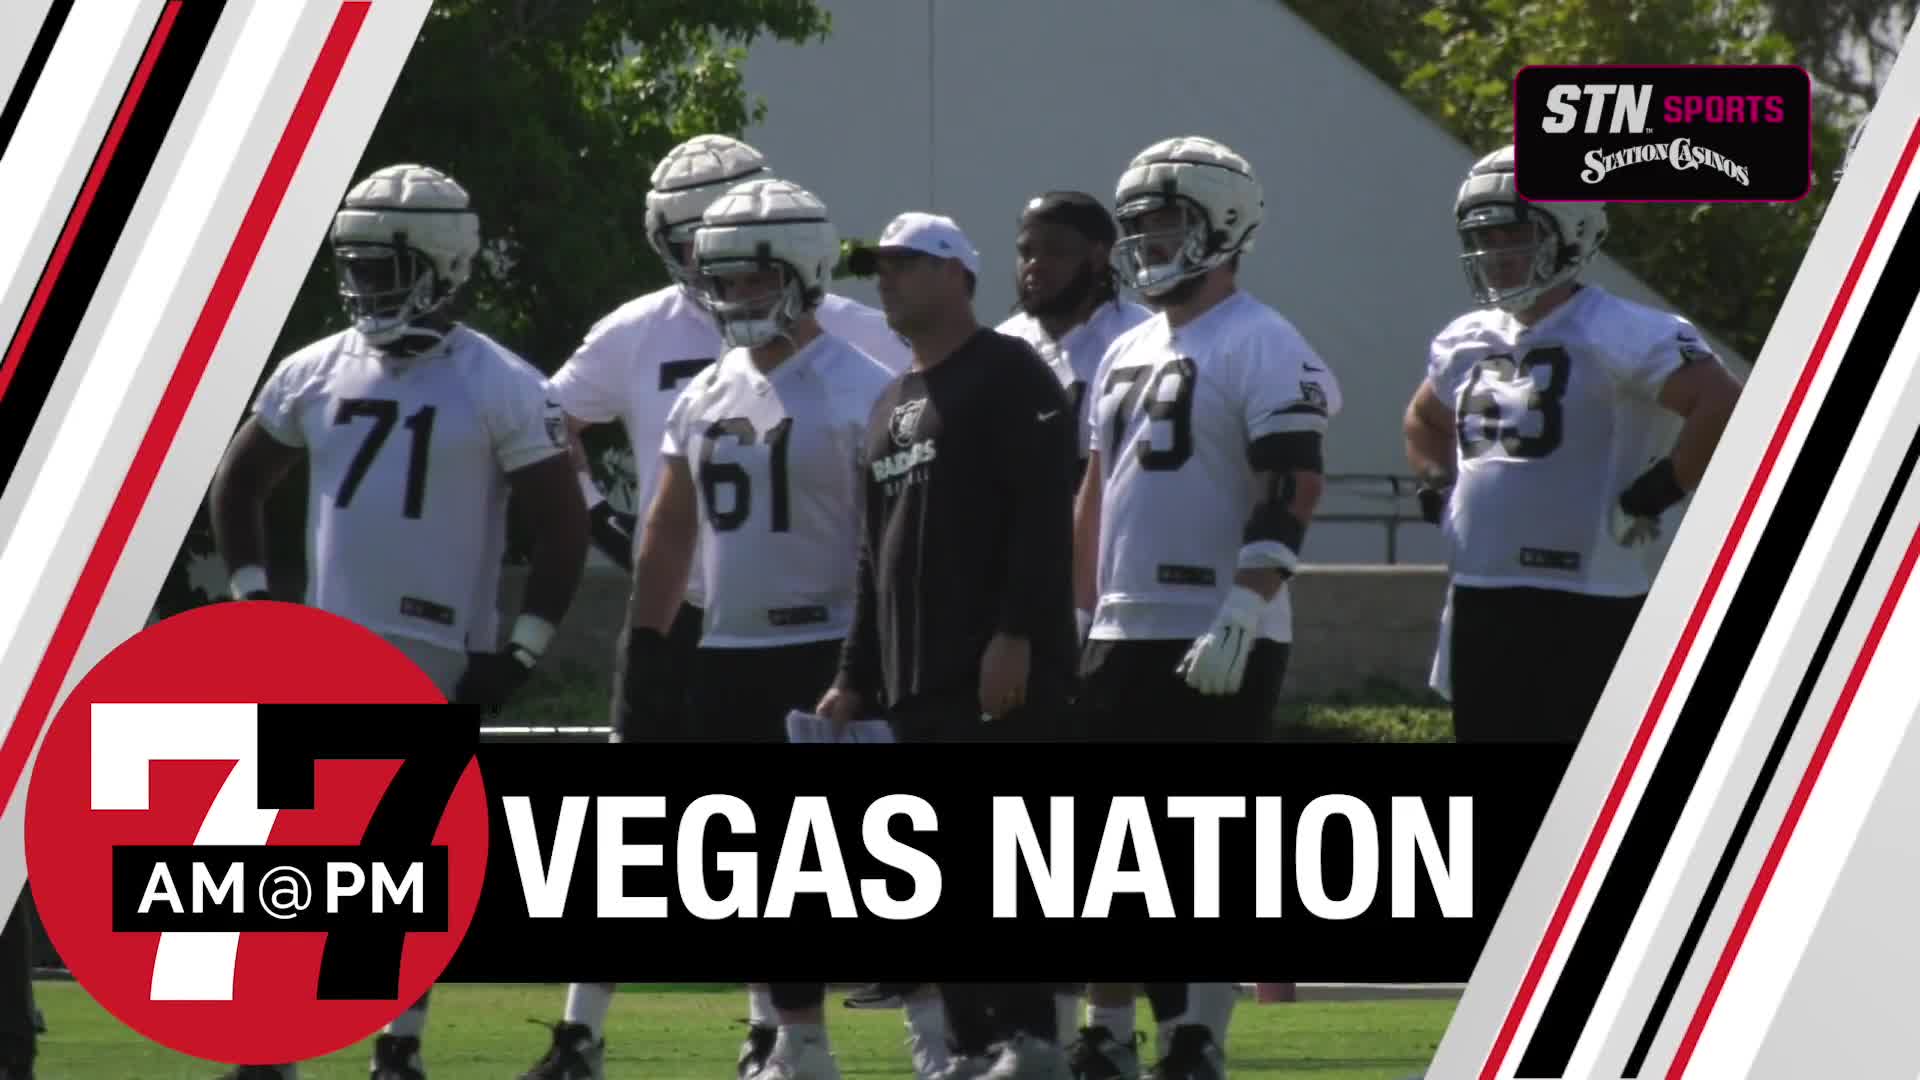 Raider rookies stand out at training camp